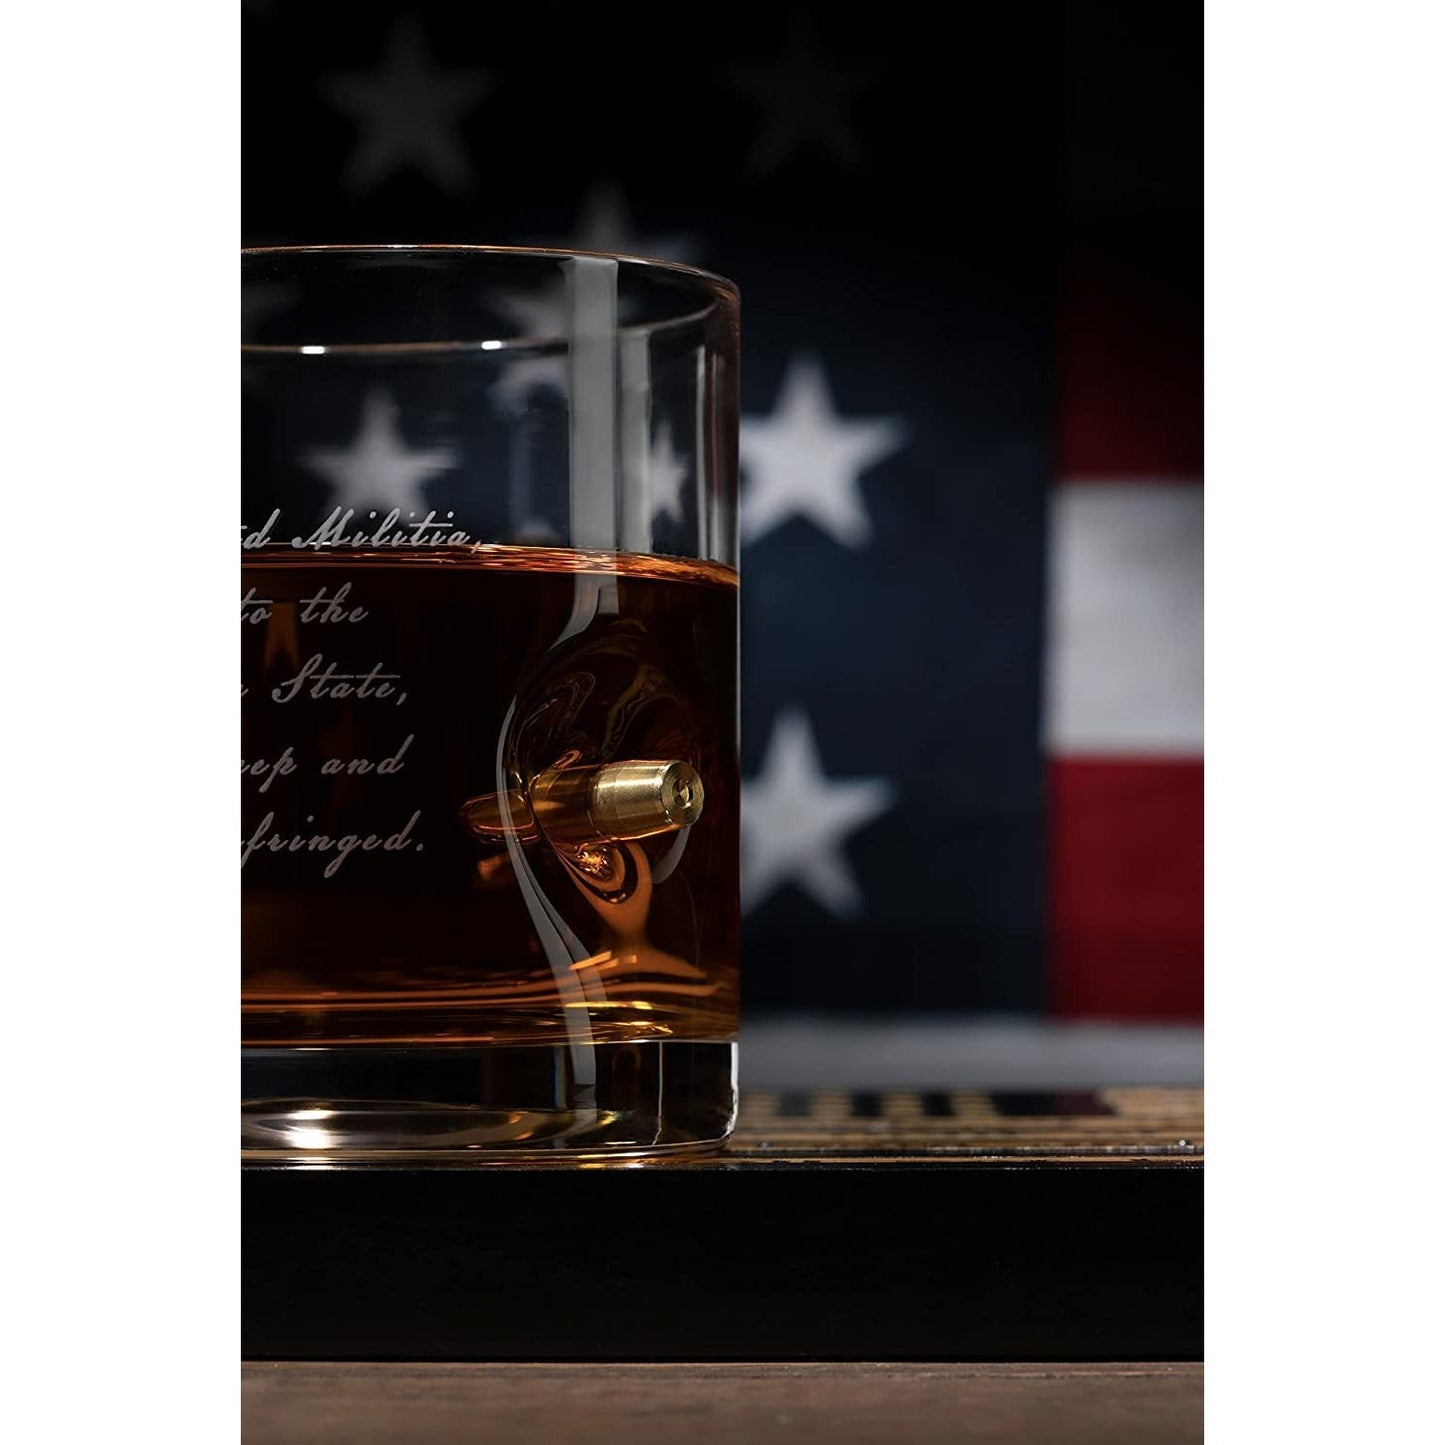 2nd Amendment American Flag Bullet Glasses .308 Real Solid Copper Projectile, Set of 4 Hand Blown Old Fashioned Whiskey Rocks Glasses, Wood Flag Tray with Patriots Gun Rights Law & Military Gift Set-2